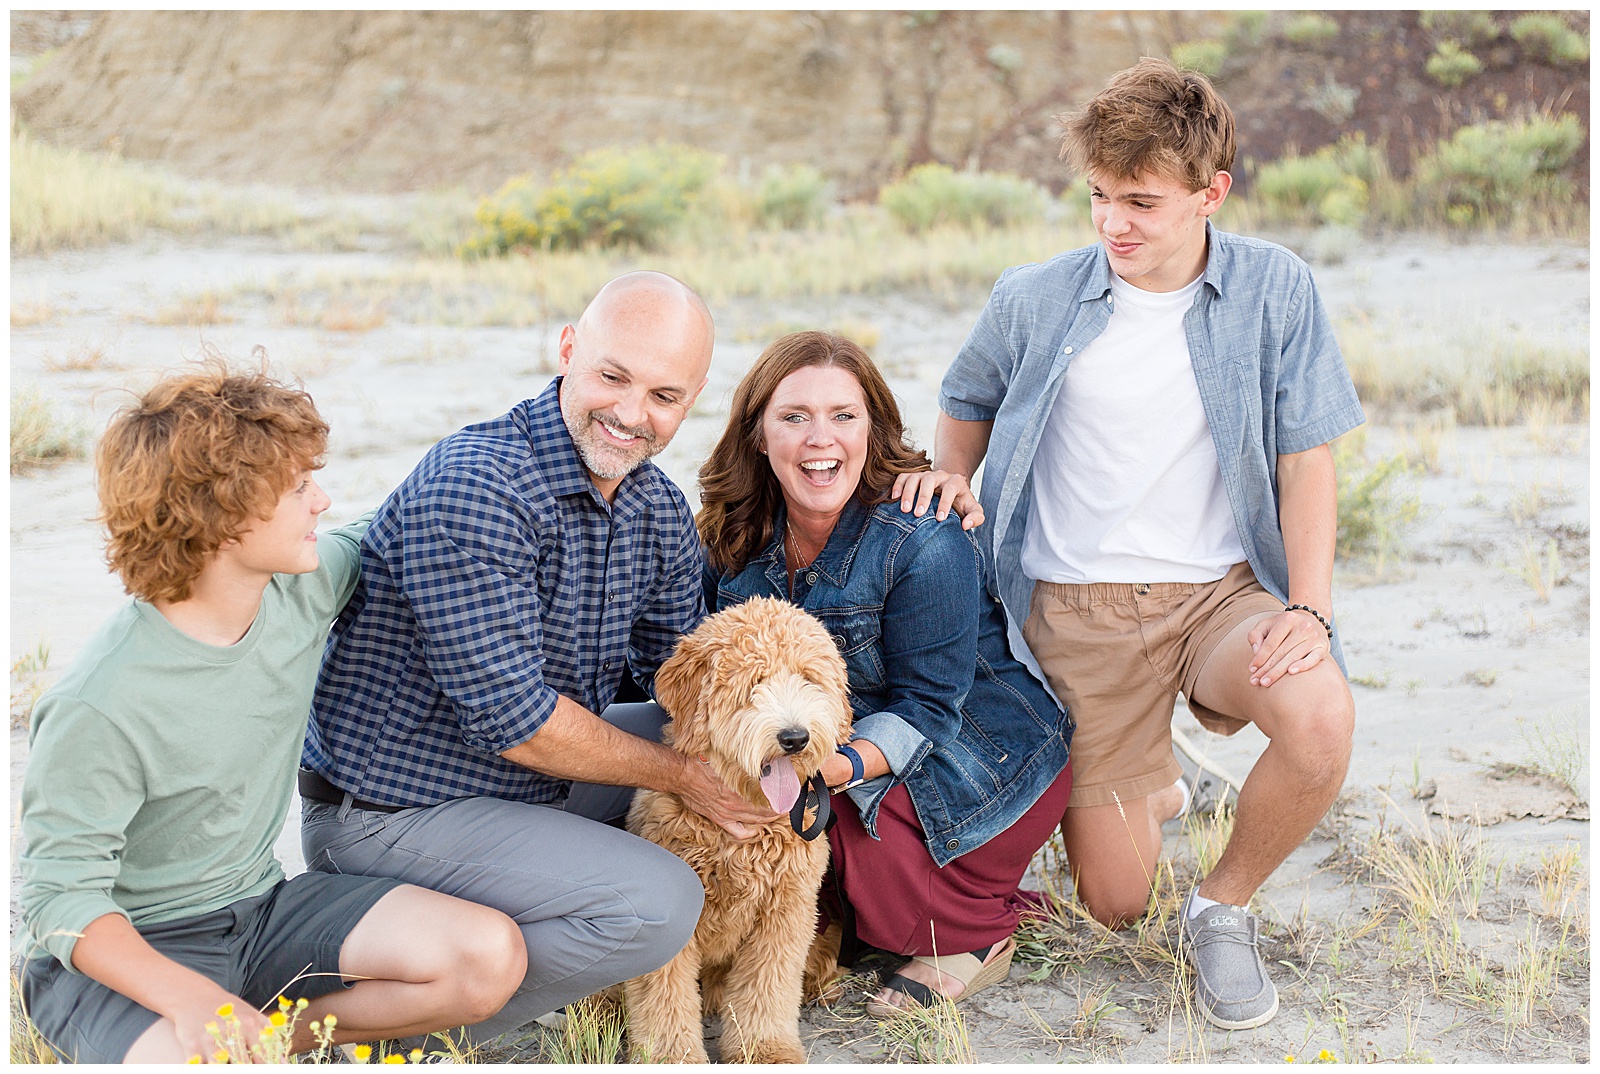 Learn to take family photography pictures with Rebeca Rice Photography for family photography. Behind the Lens is a membership course for family photographers. Family laughs with each other and their doodle puppy for their family photography session in North Dakota.